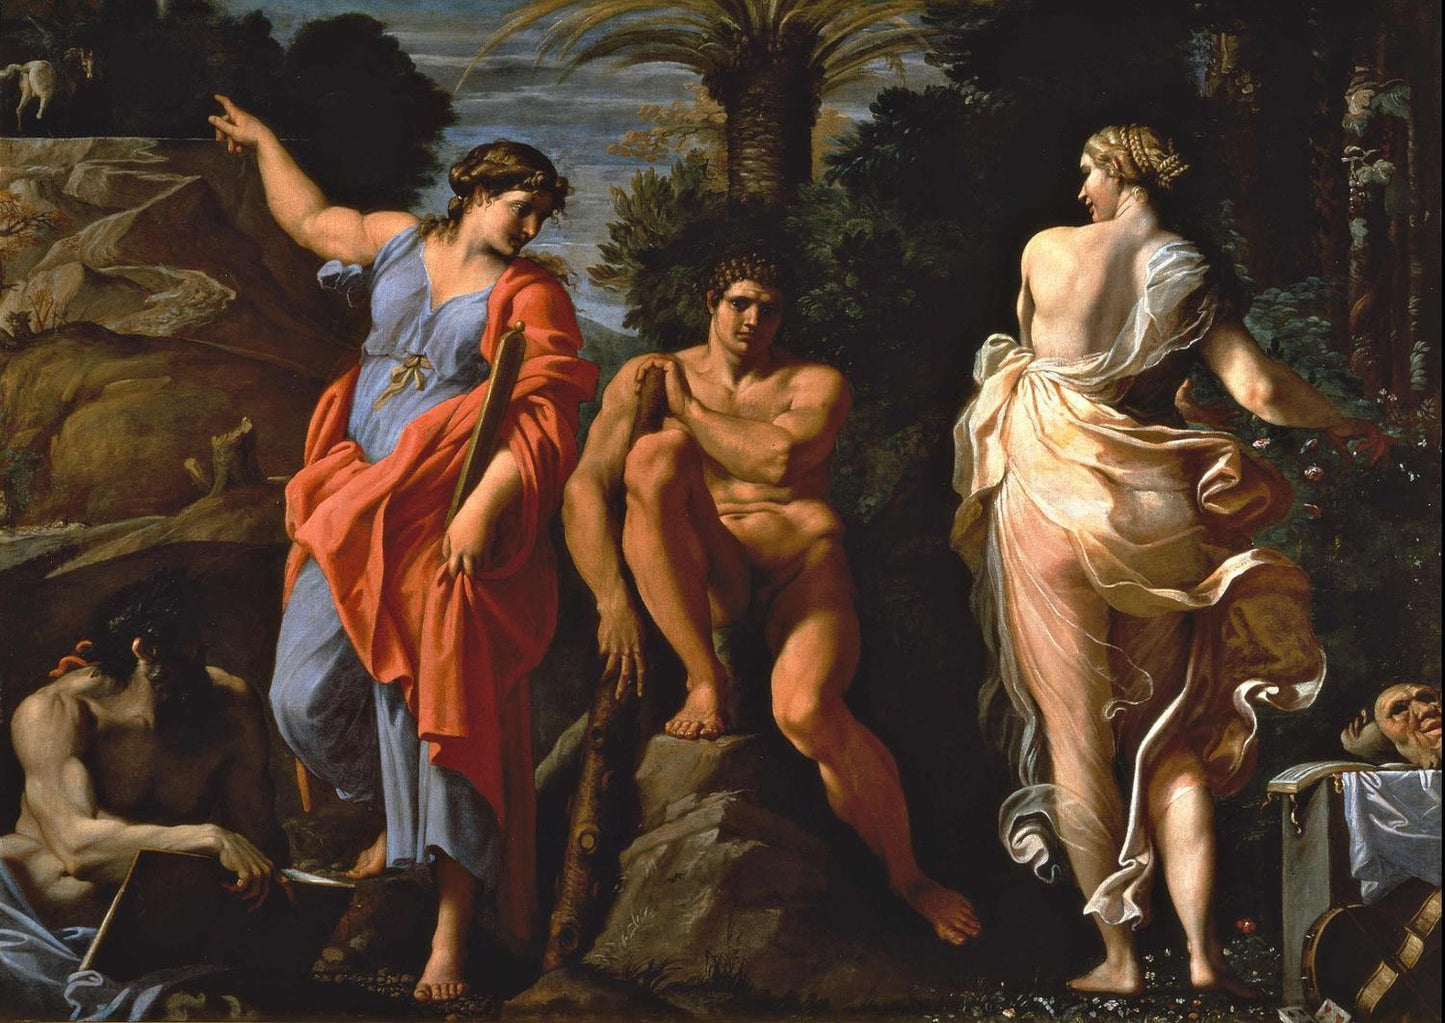 The Judgment of Hercules, 1596, Annibale Carracci